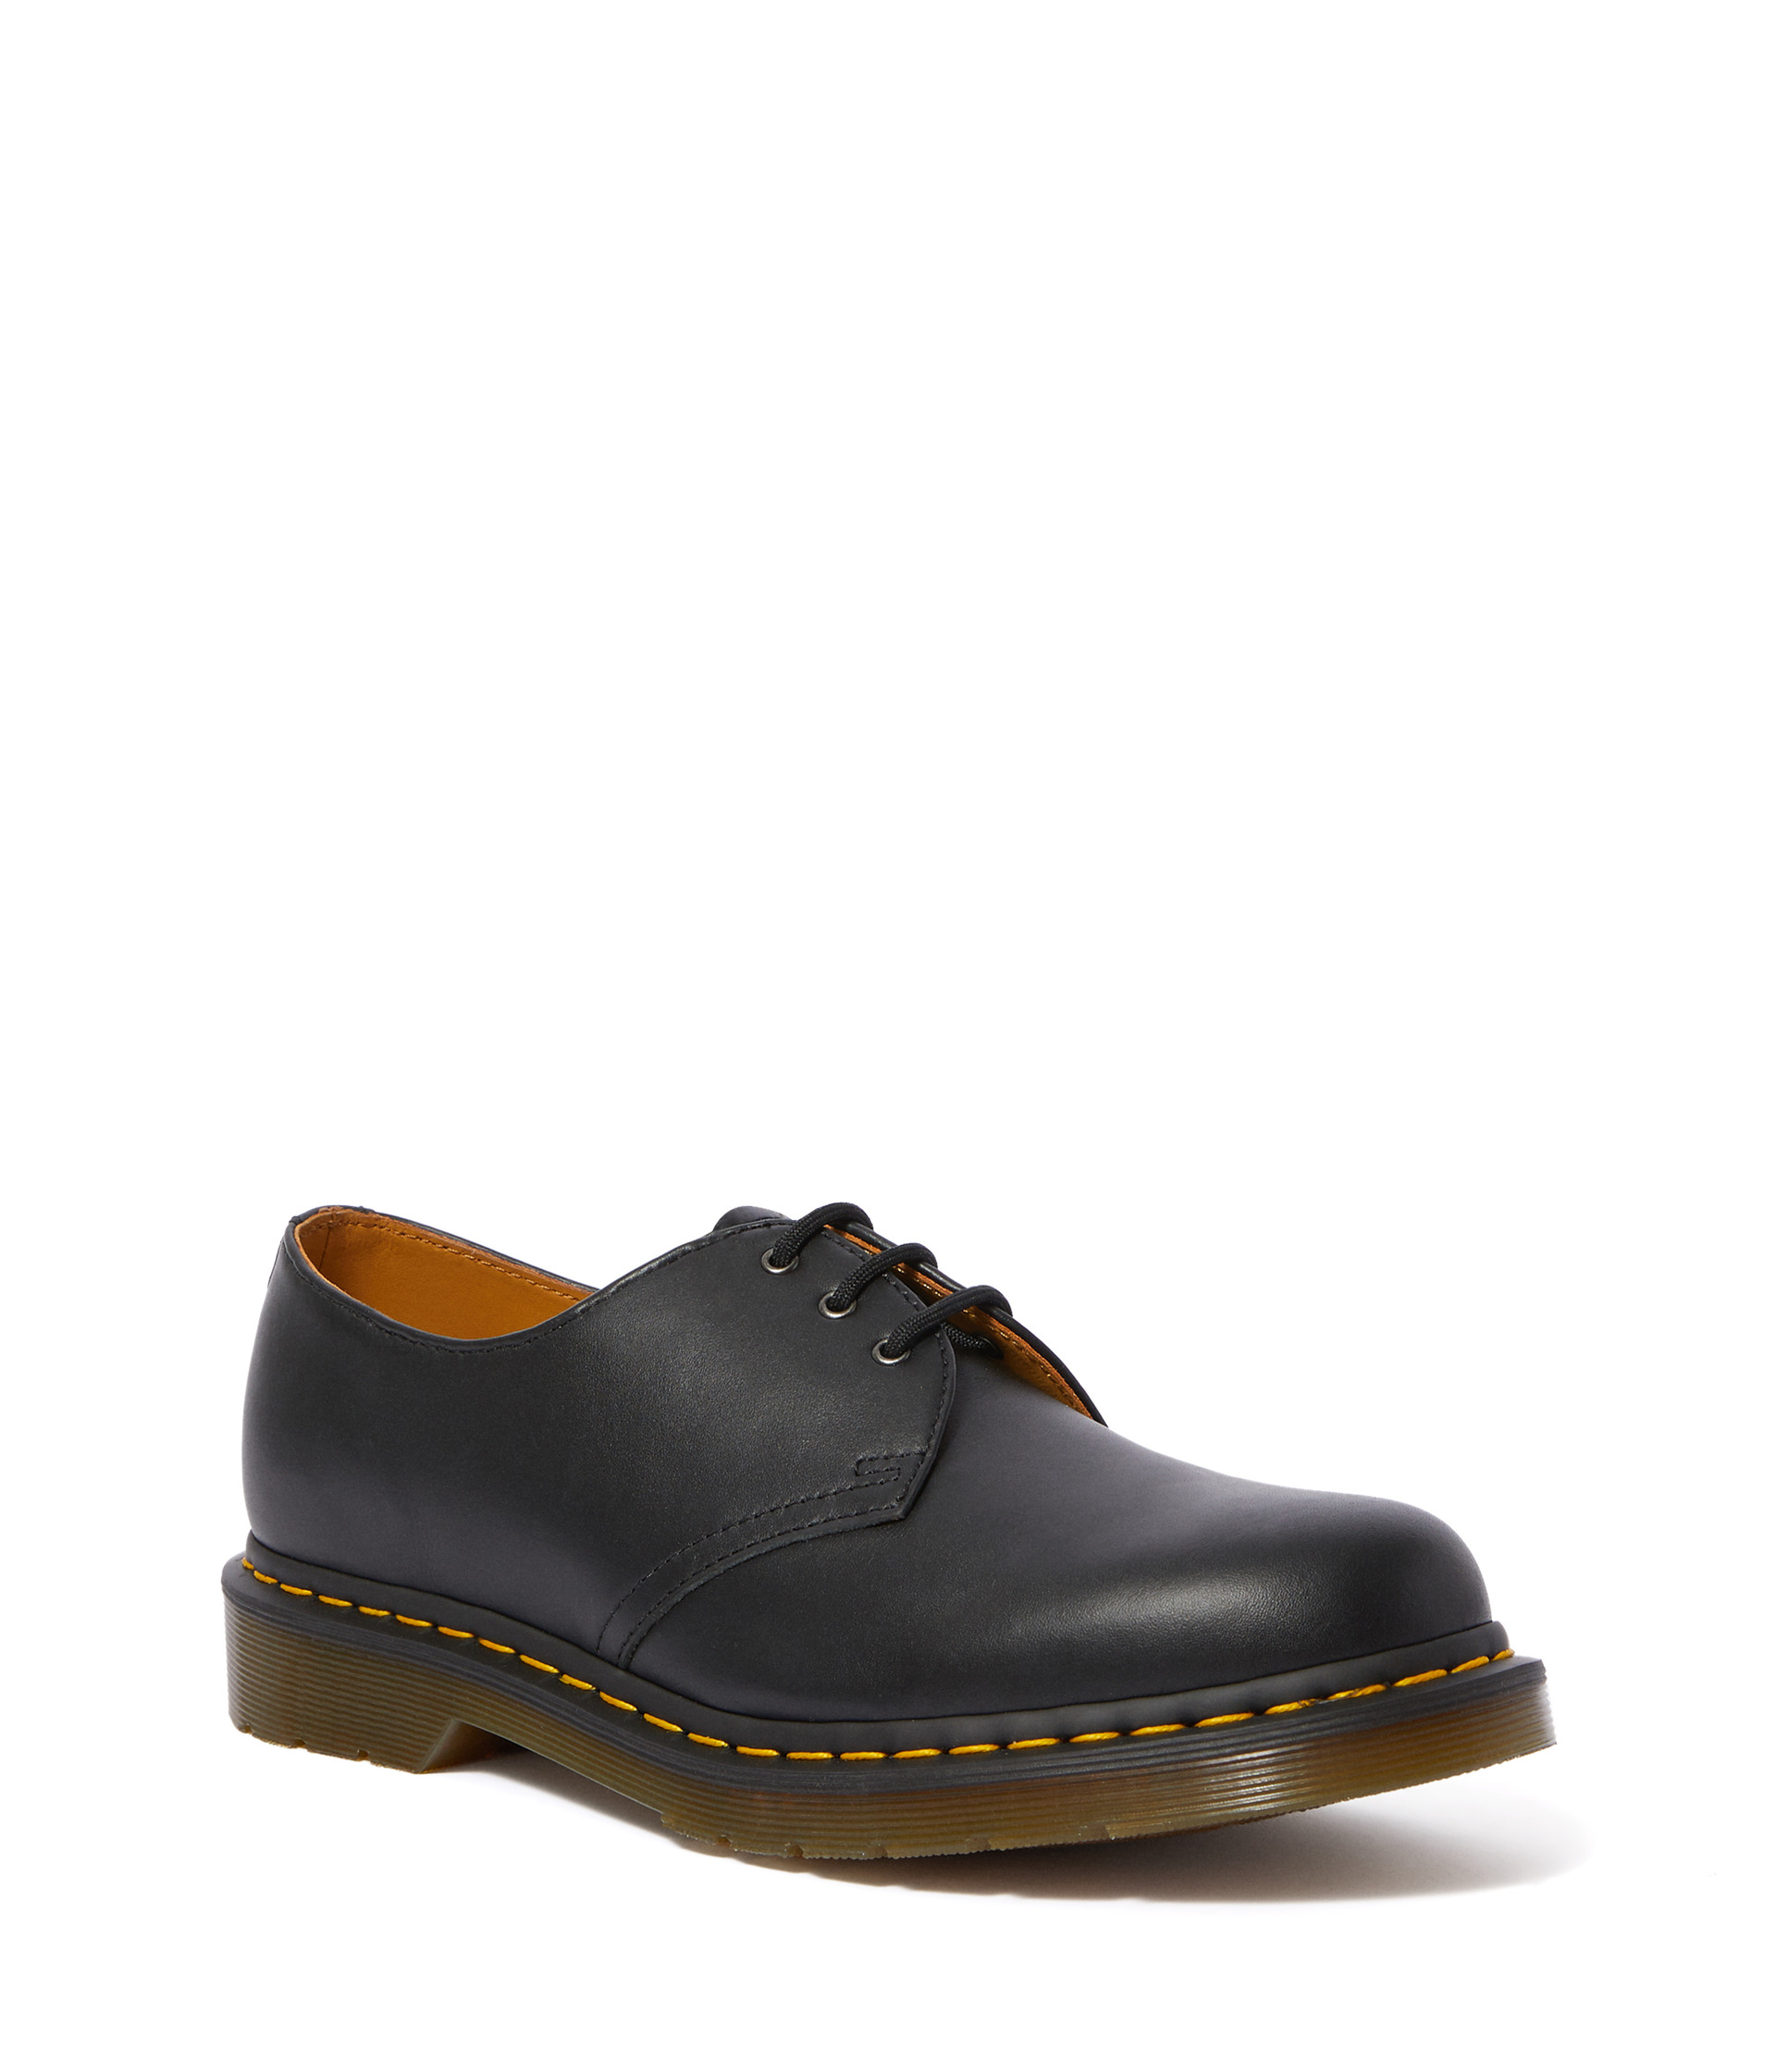 dr martens 1461 3 eye gibson $ 110 00 rated